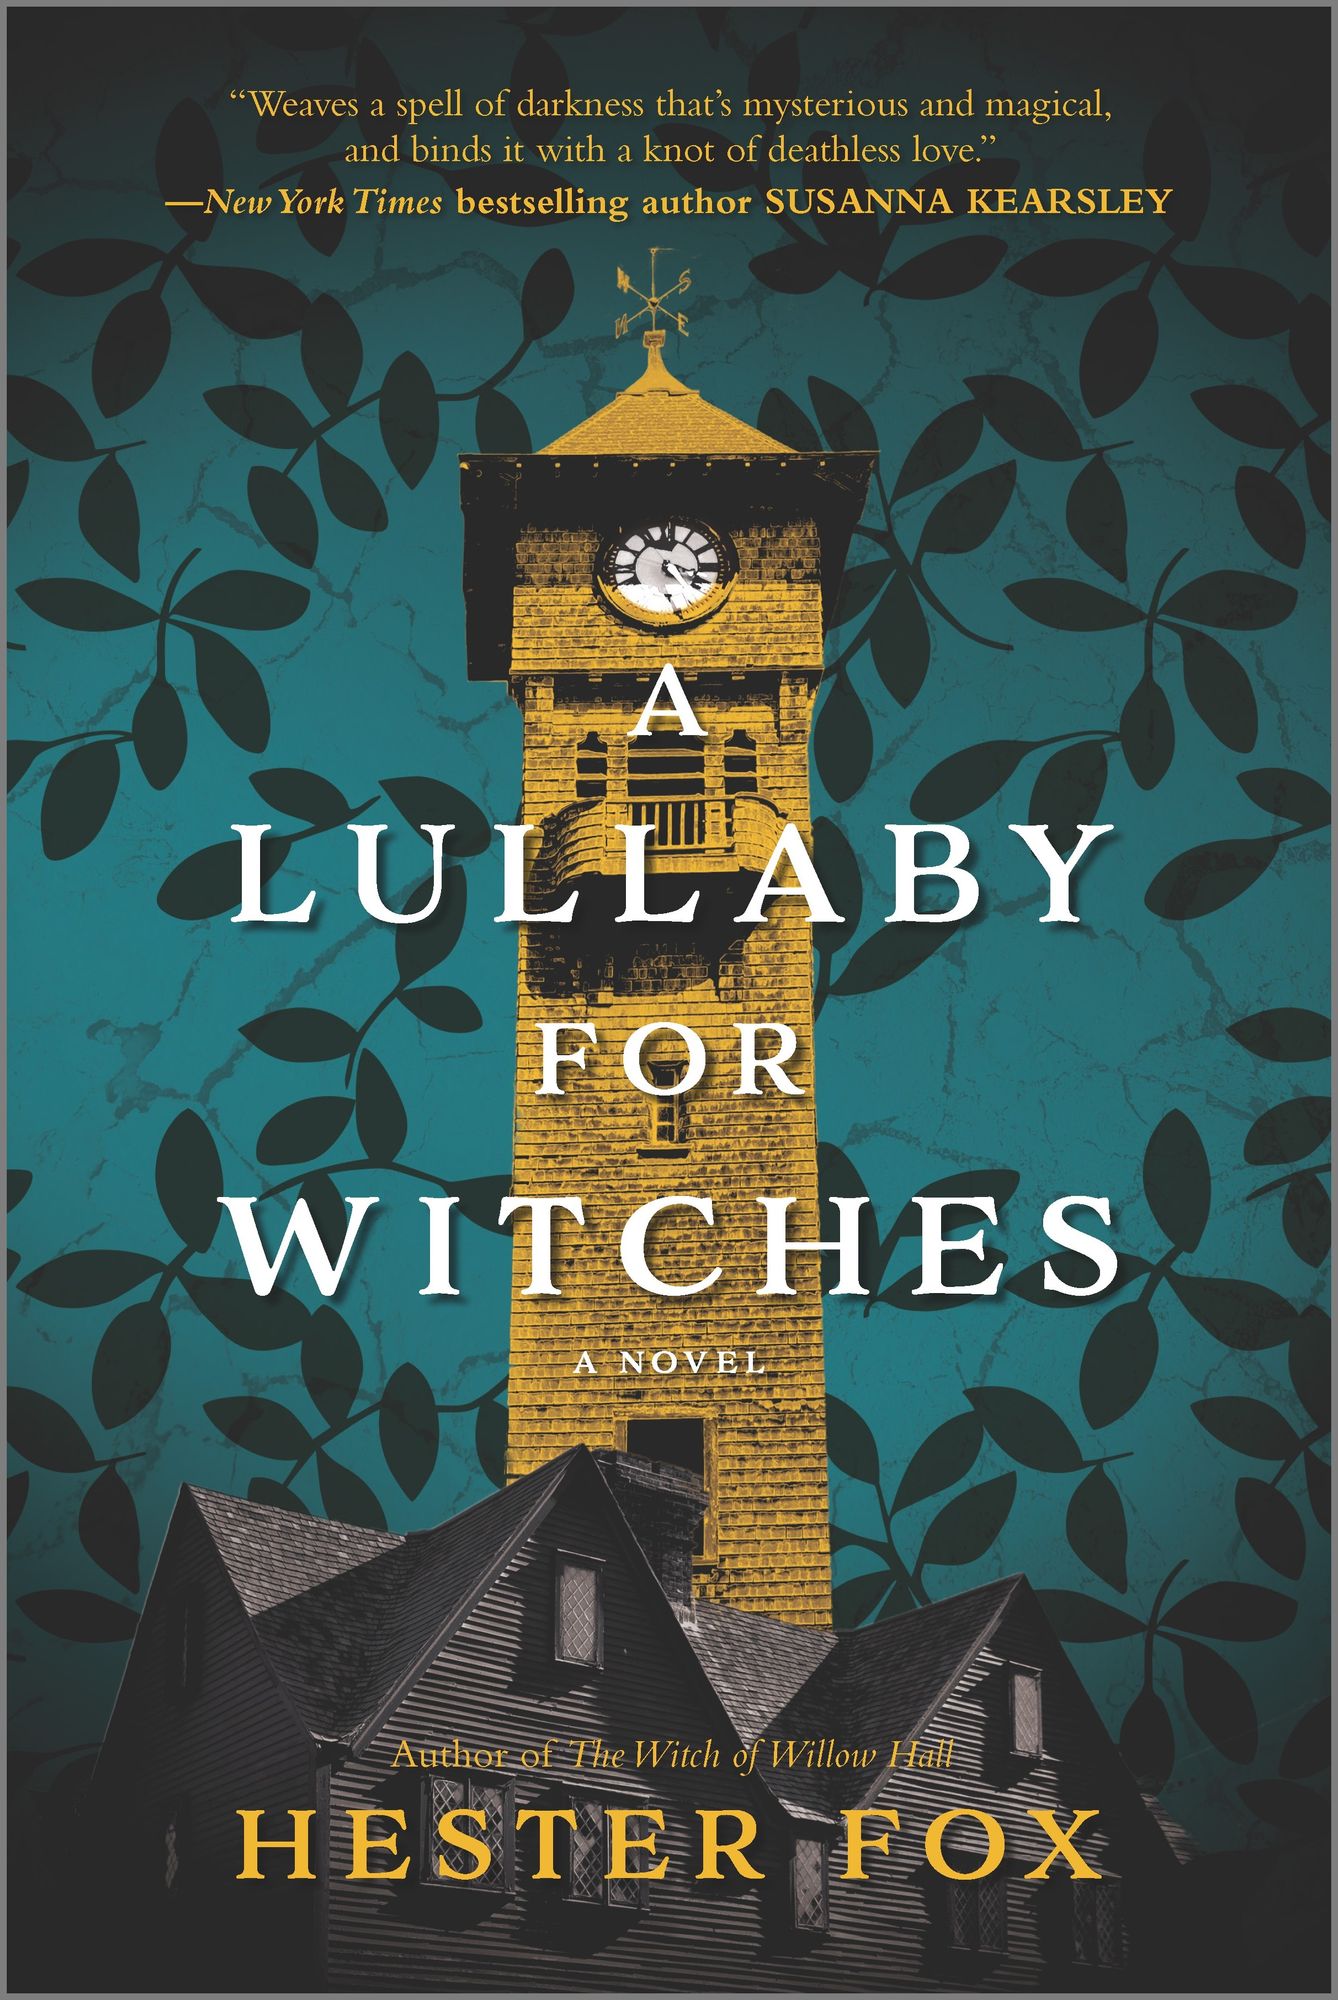 A Lullaby for Witches by Hester Fox